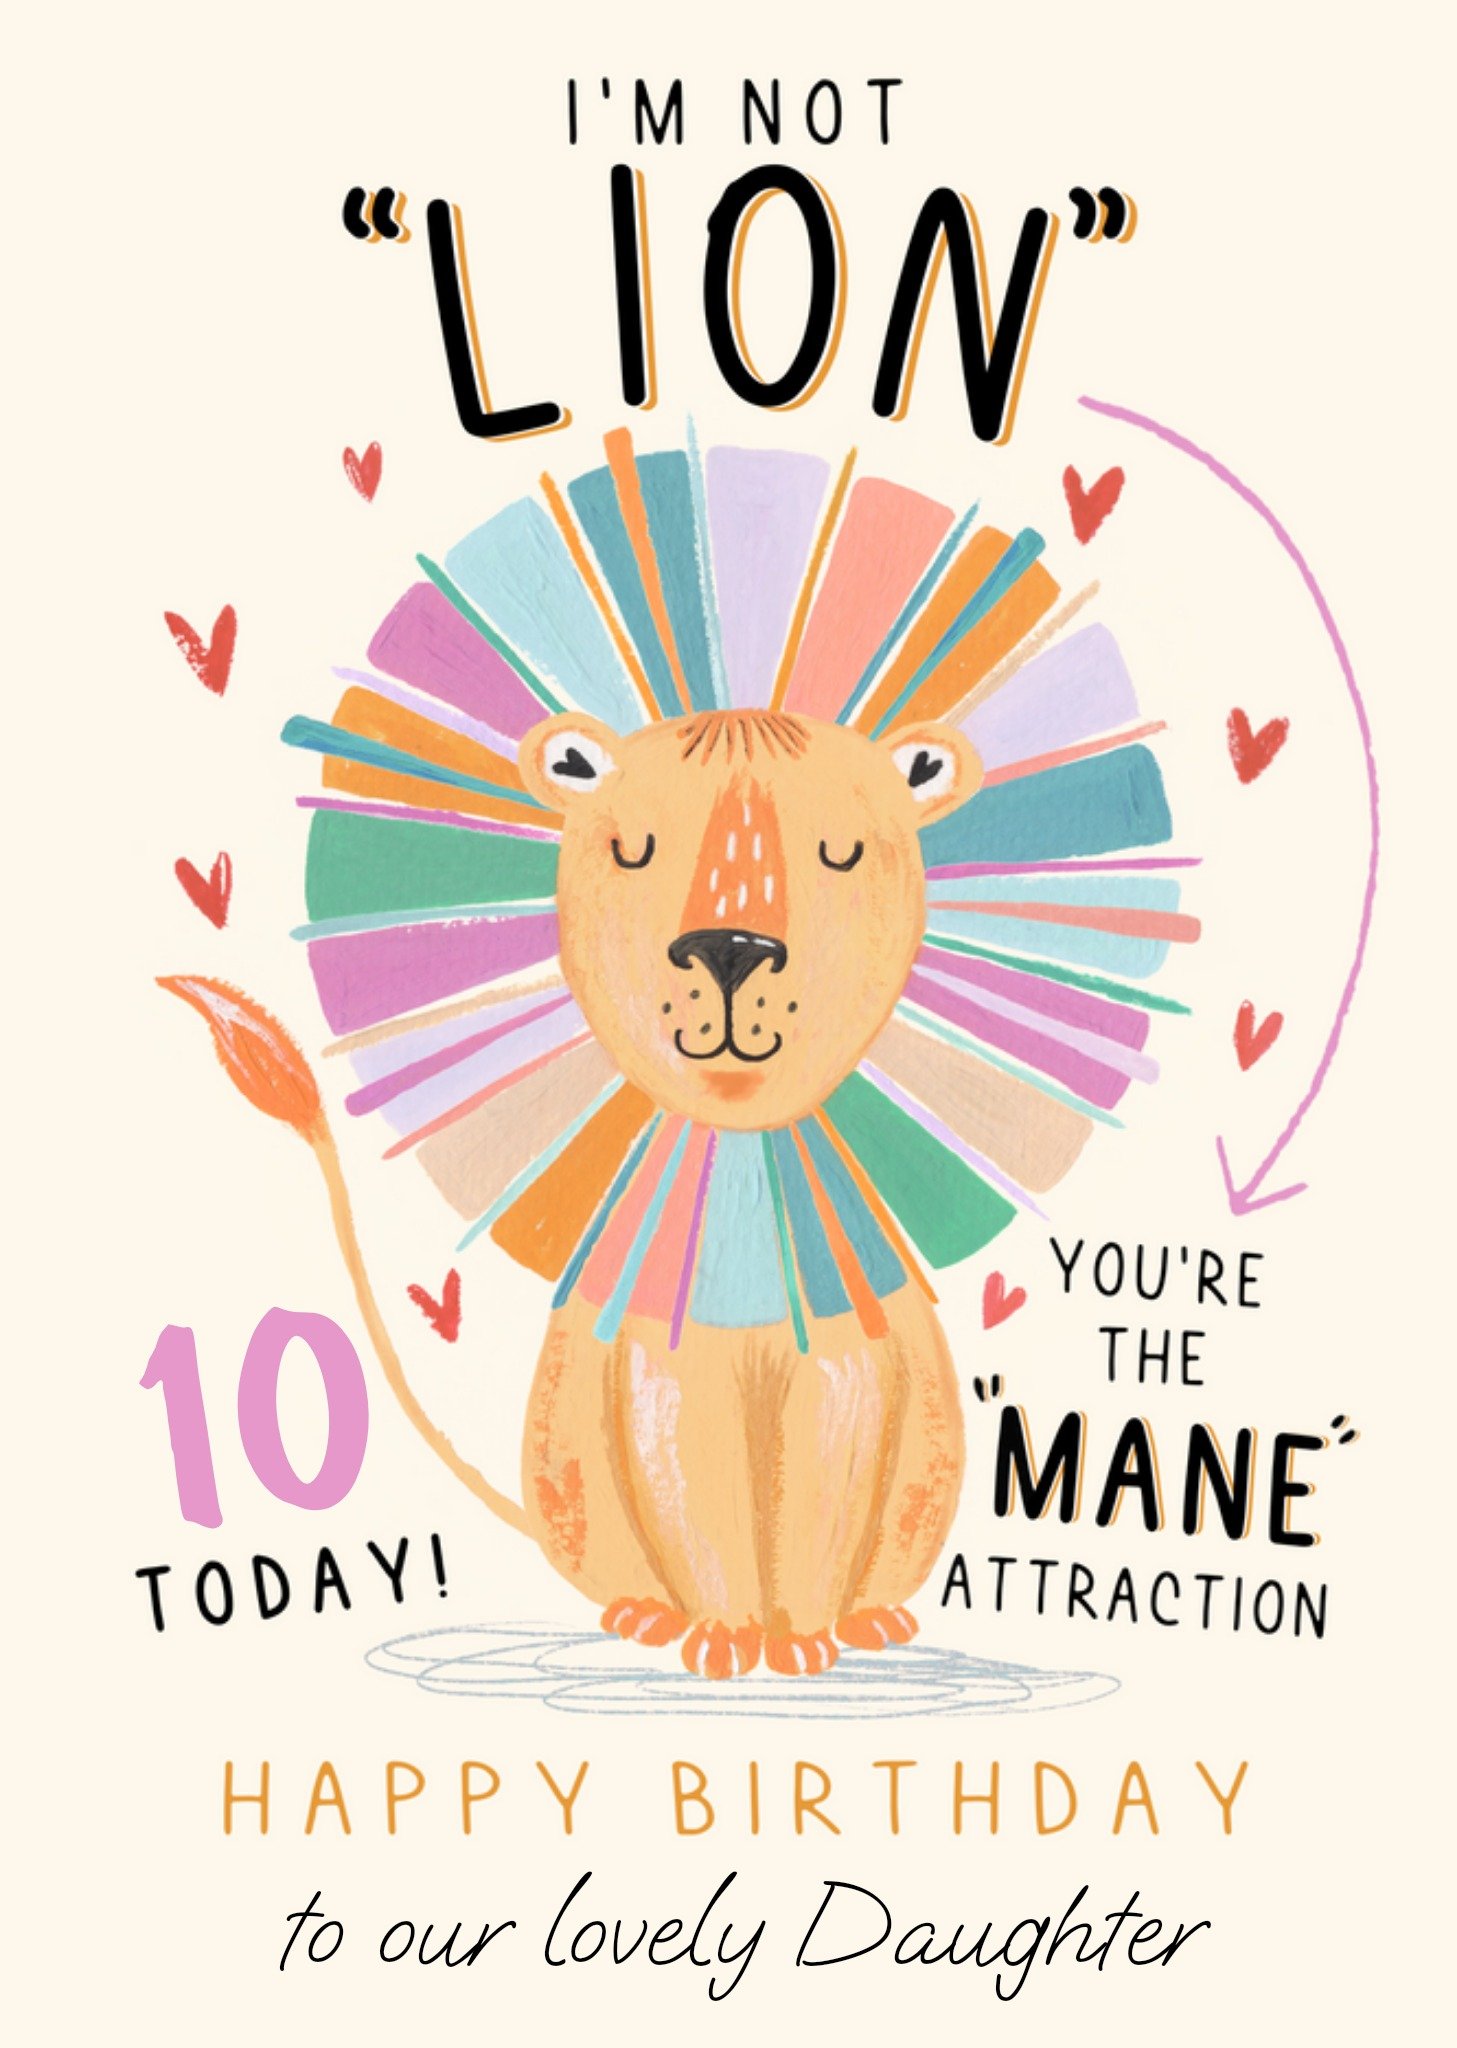 Moonpig I'm Not Lion Your The Mane Attraction Birthday Card, Large